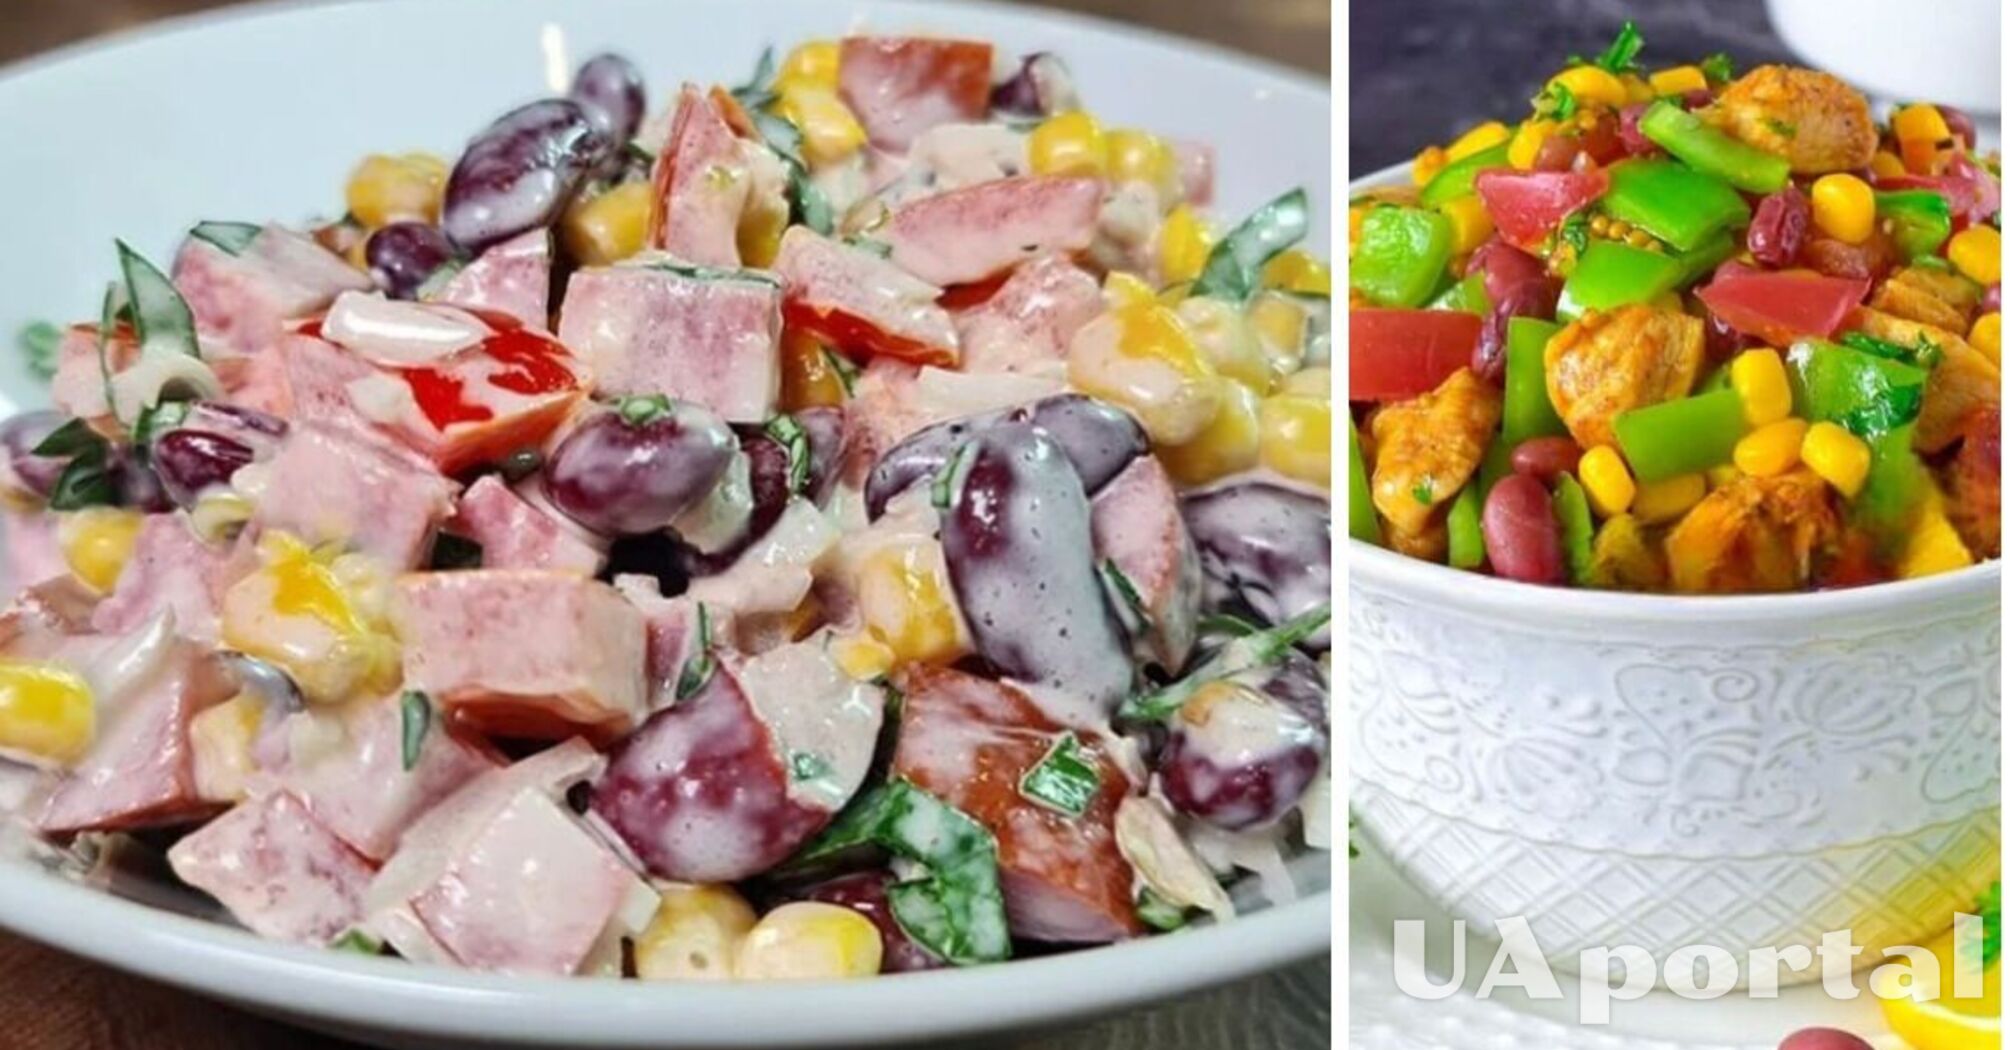 How to make a salad of canned corn and beans